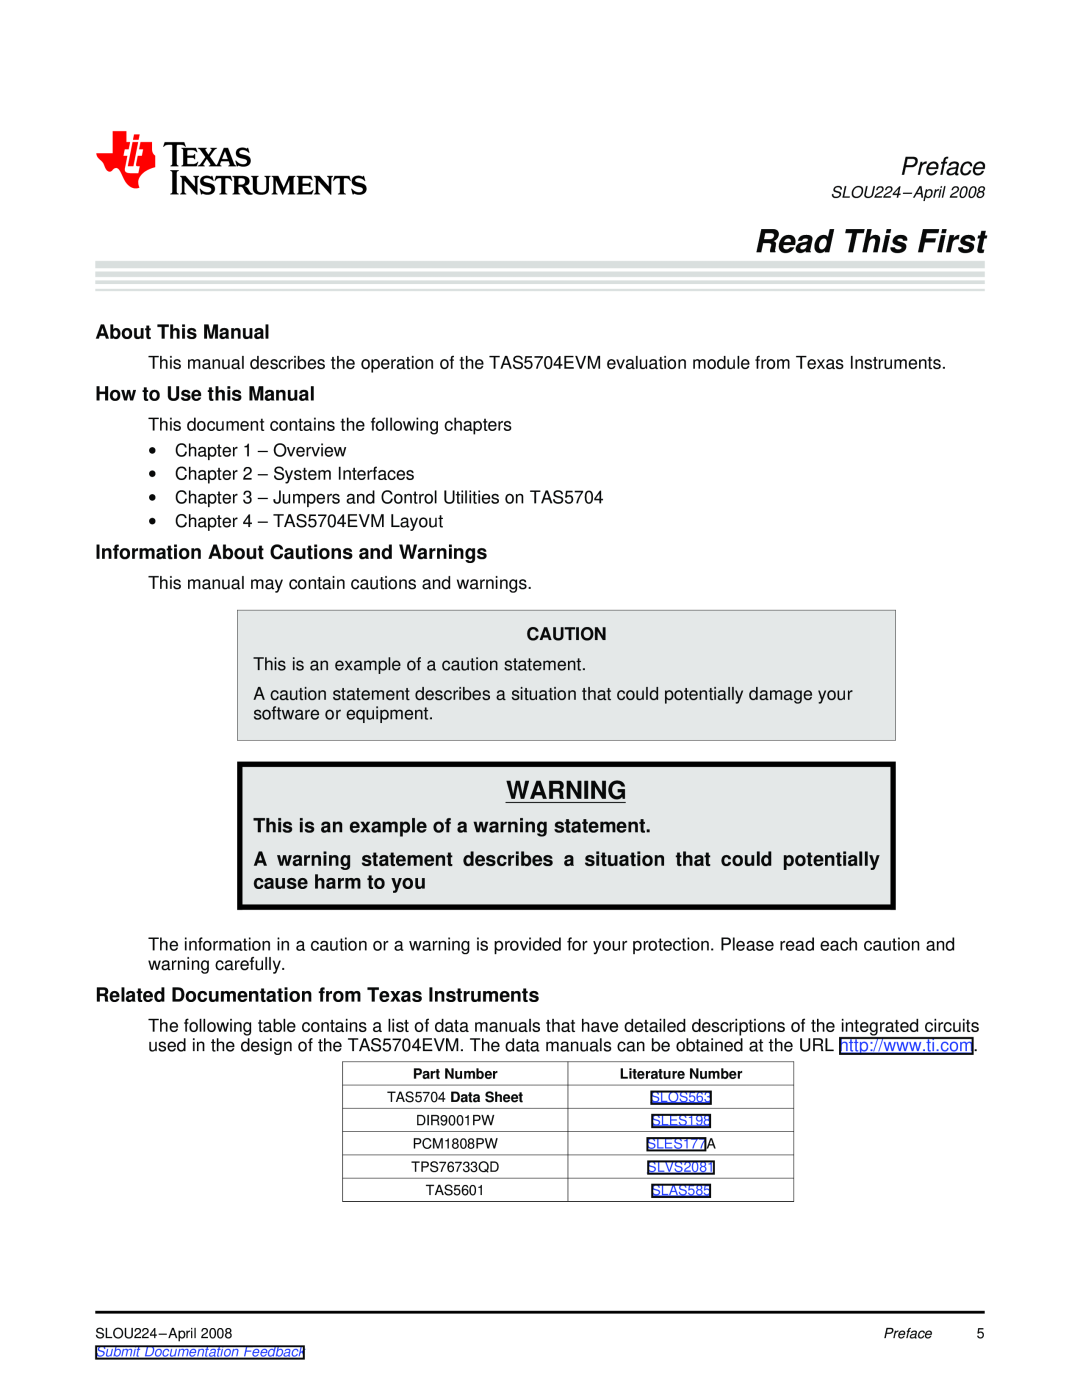 Texas Instruments TA5704EVM manual Read This First, Preface, About This Manual, How to Use this Manual 